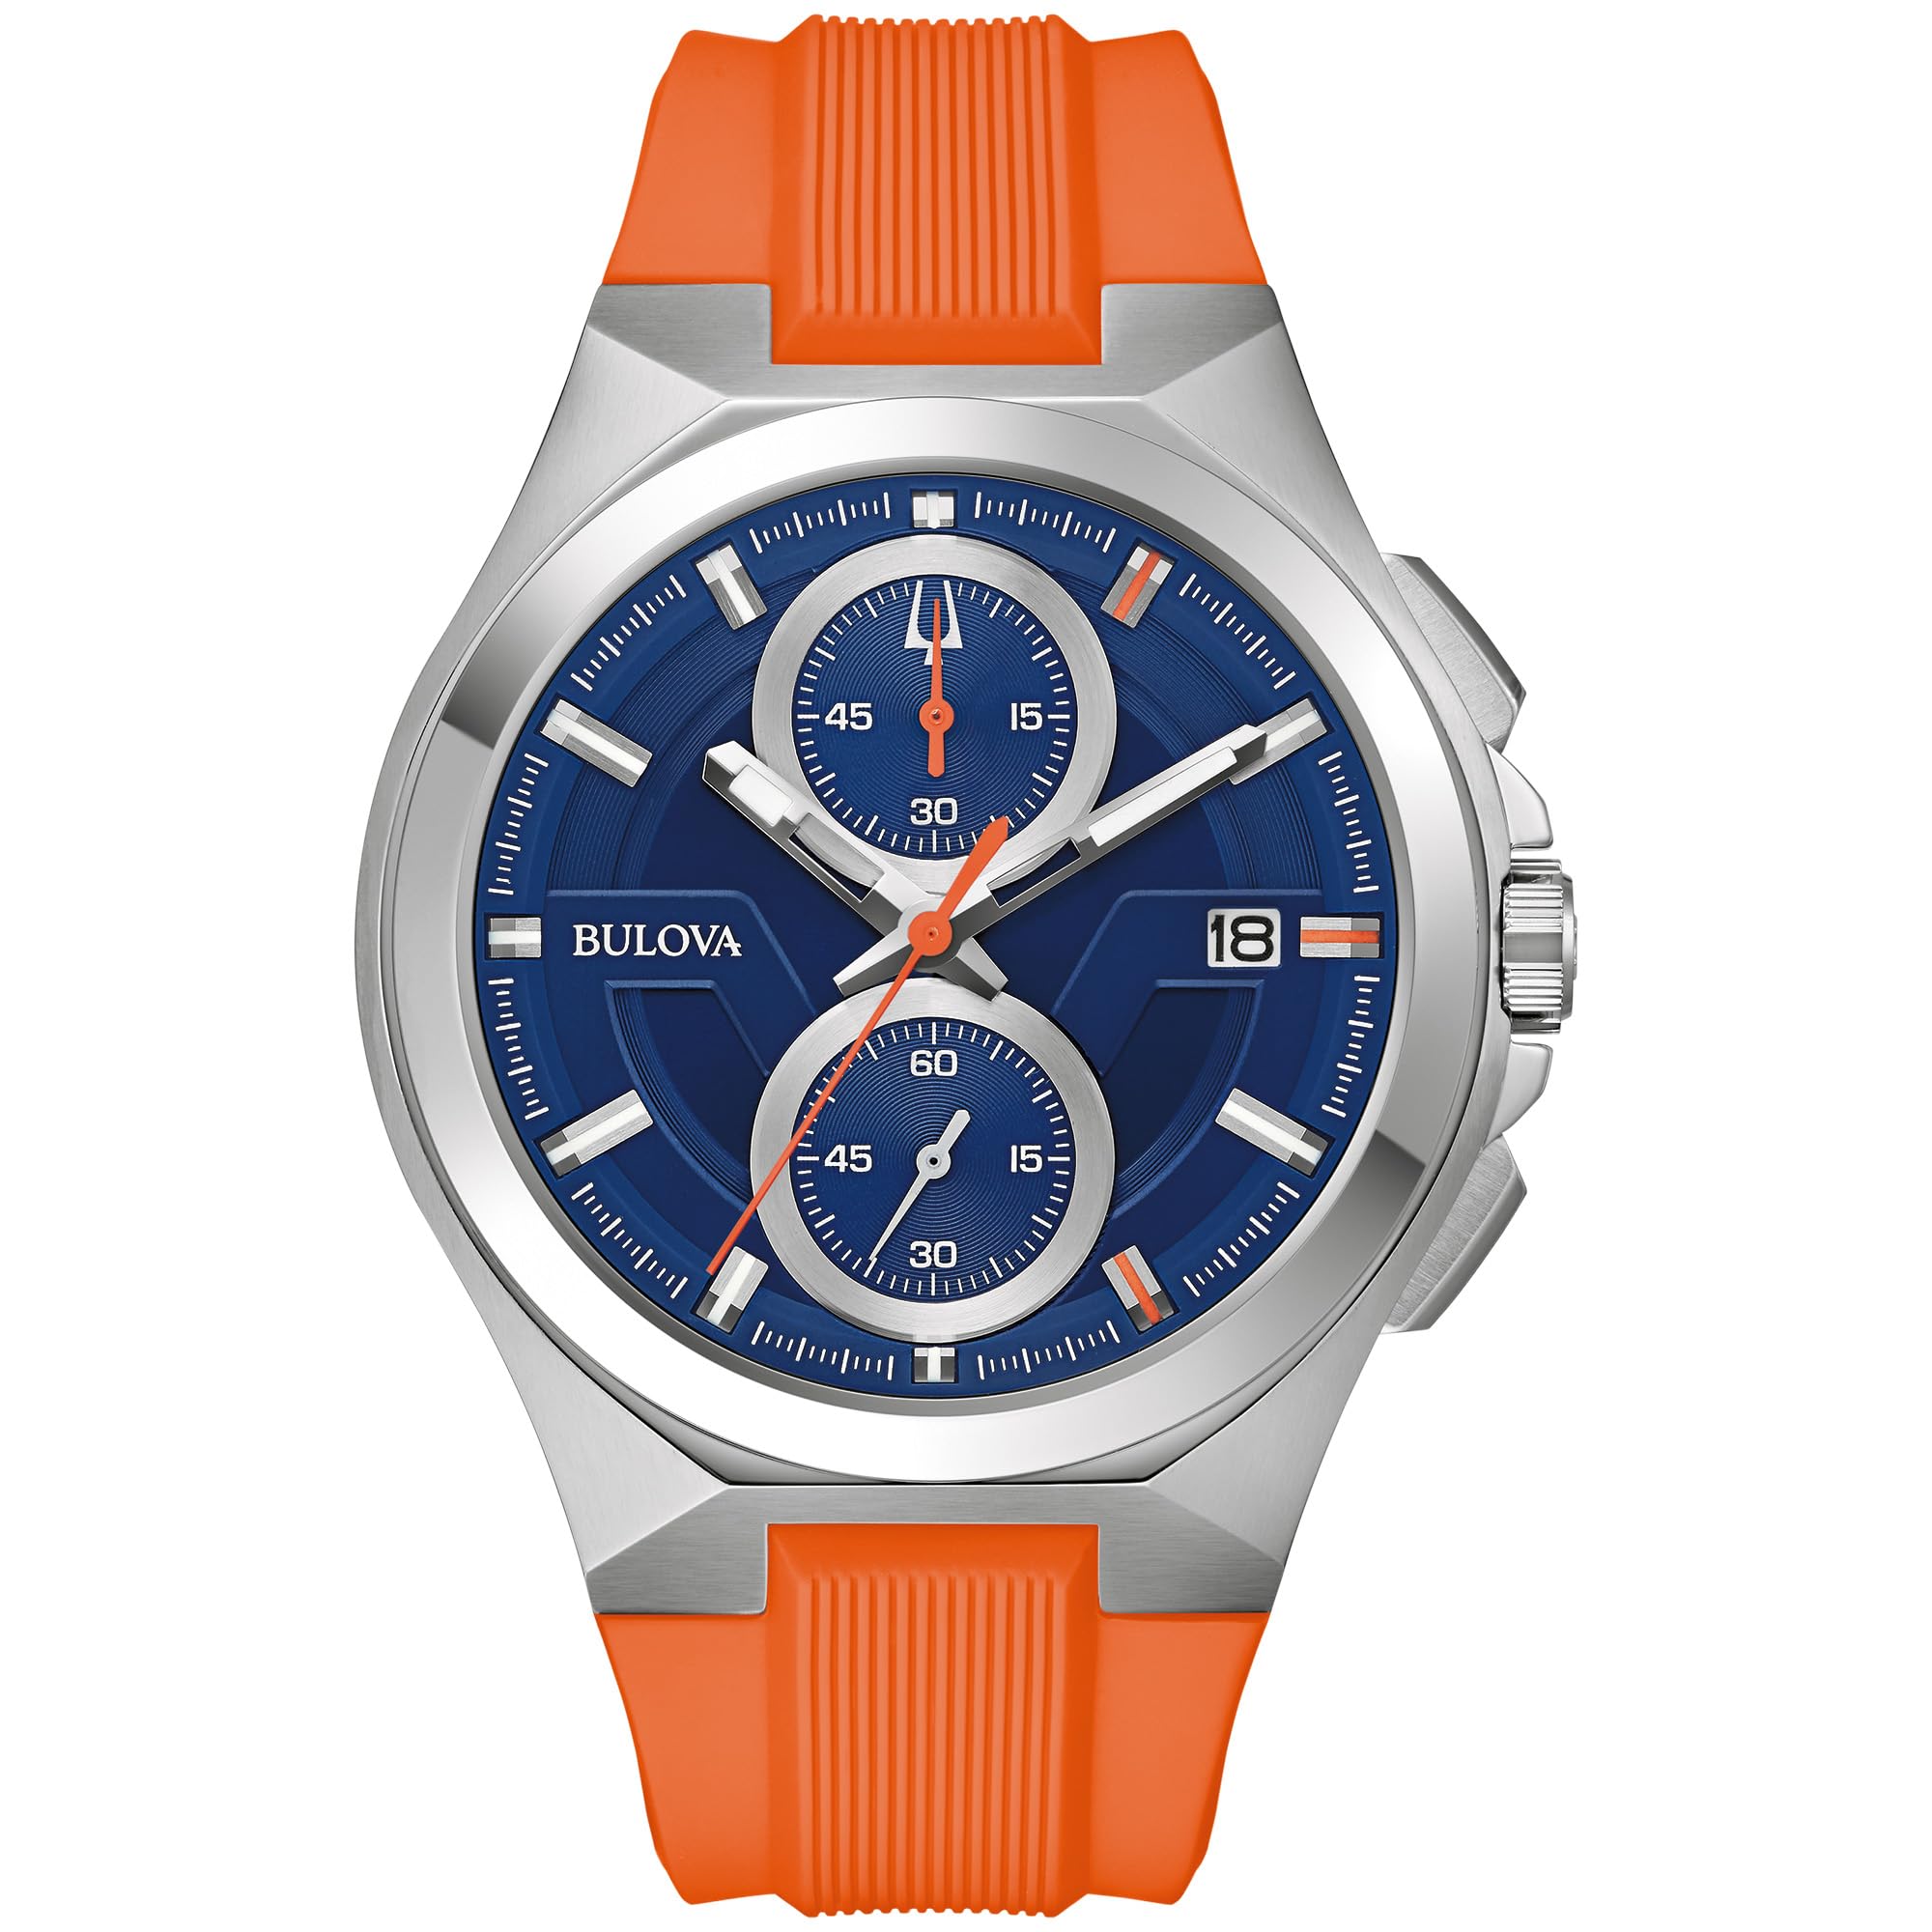 Bulova Marc Anthony Men's Maquina Chronograph Stainless Steel Case with Orange Silicone Strap,Blue Dial, Anti-Reflective Sapphire Crystal (Model:96B407)